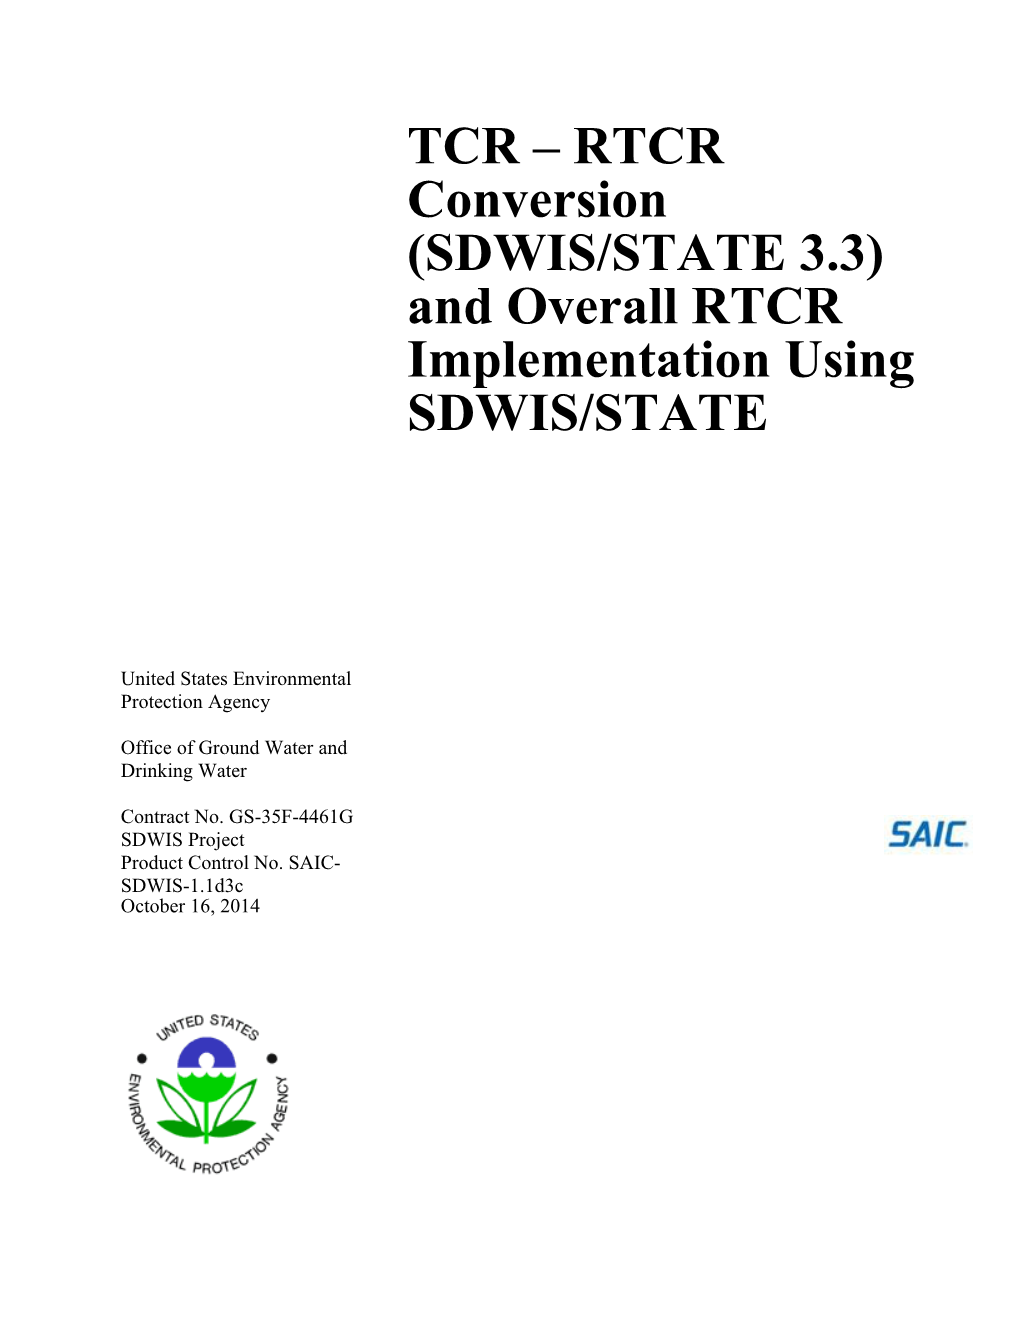 TCR Rtcr Conversion (SDWIS/STATE 3.3) and Overall Rtcr Implementation Using SDWIS/STATE